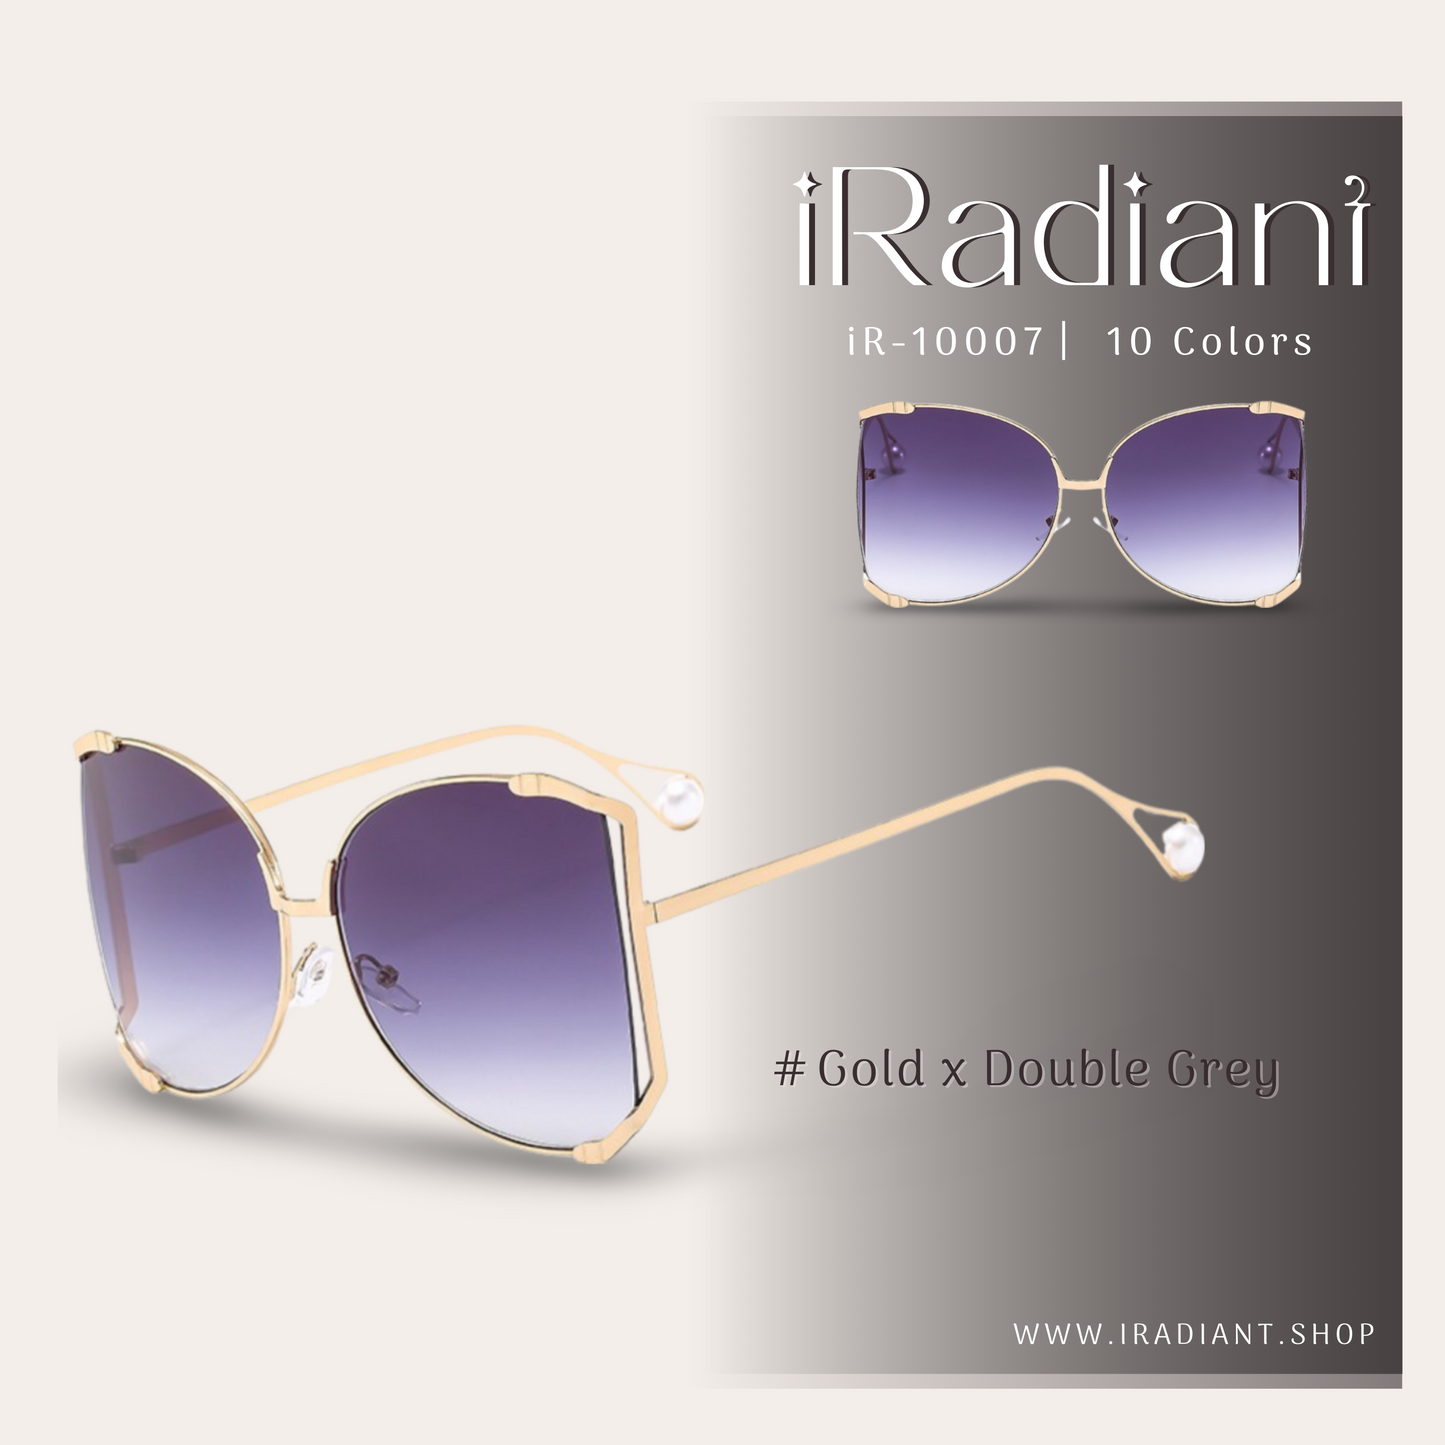 iR-10007-B ︳iRadiant Semi-Rimless With Pearls Design Temple Arm Shades ︳For Women's ︳Gold x Double Grey